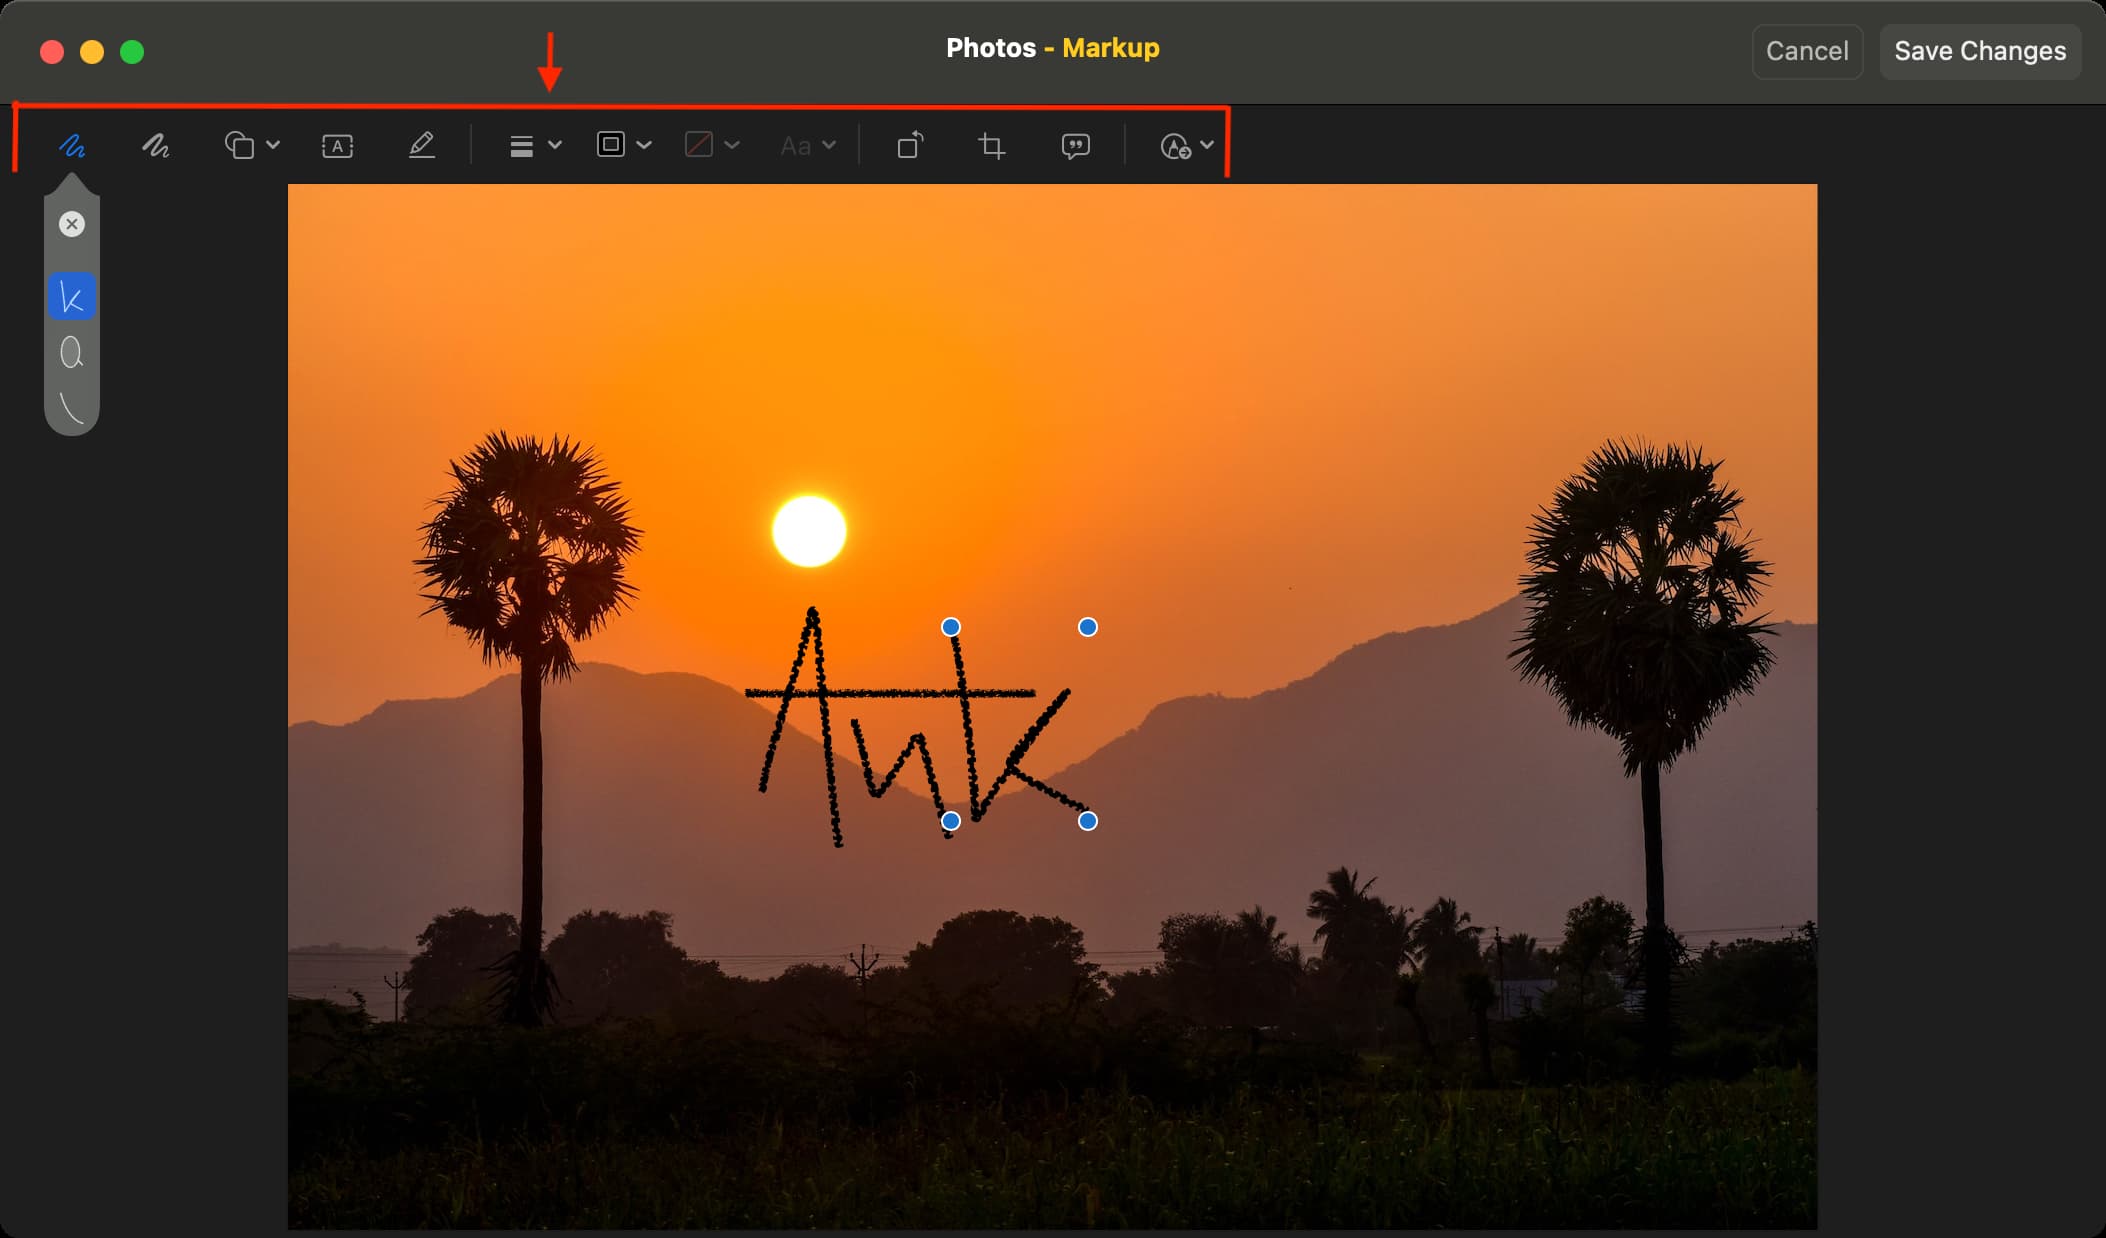 Markup tools in Photos on Mac